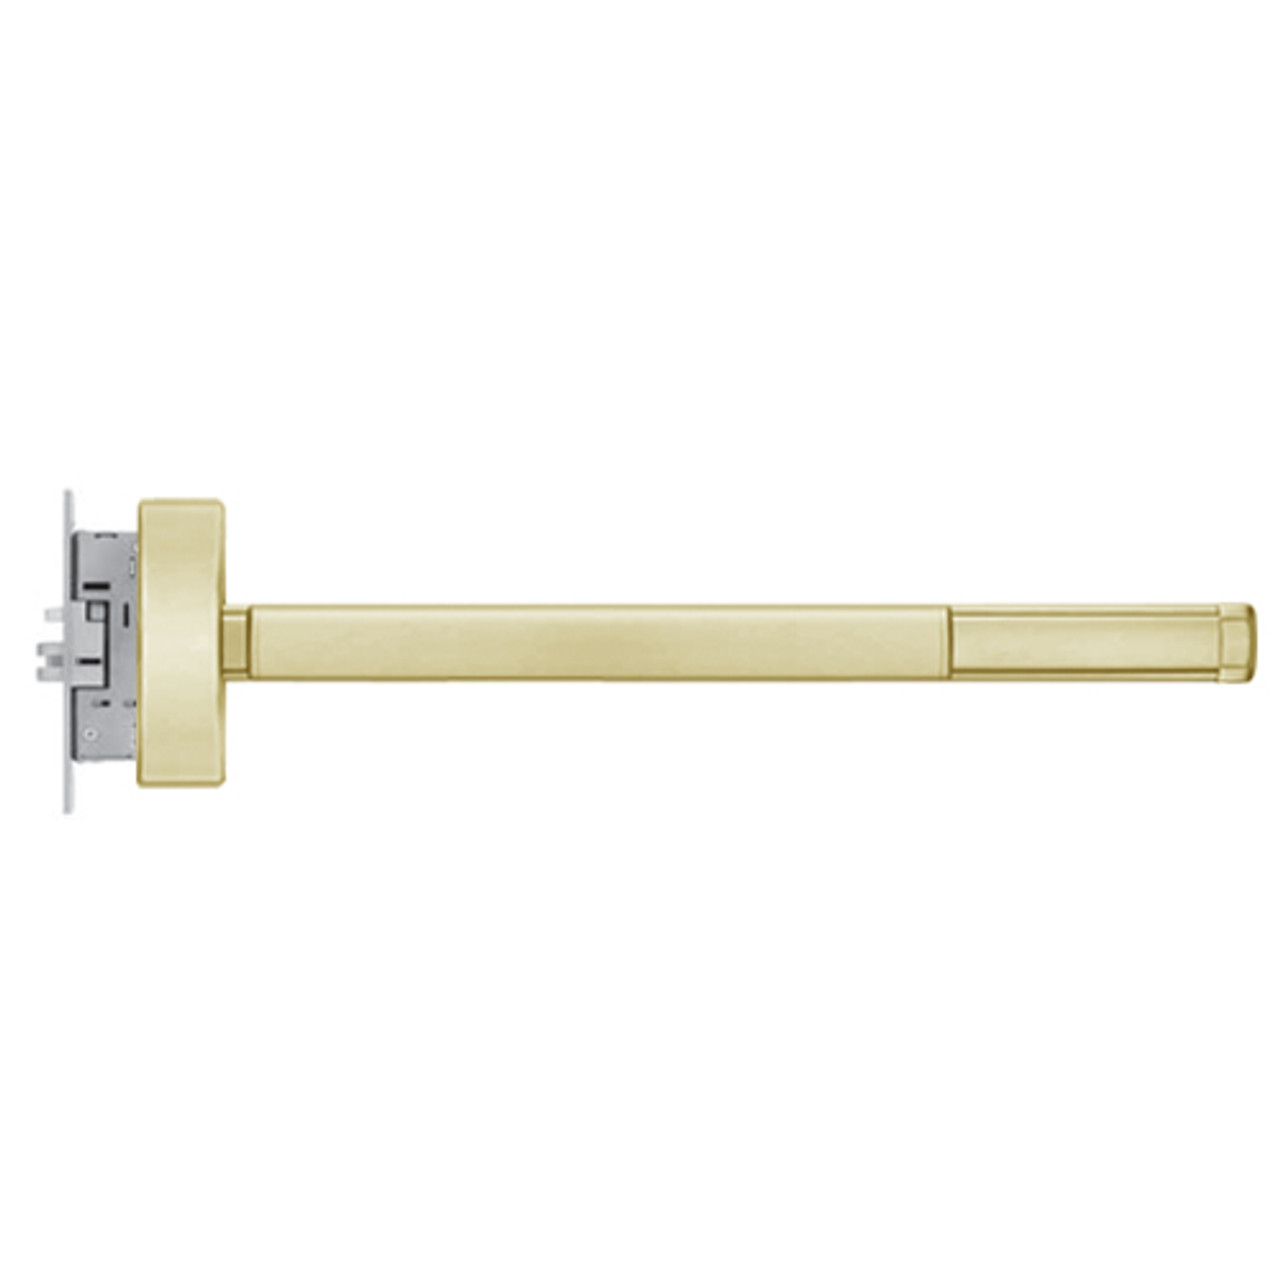 ELRFL2315-LHR-606-48 PHI 2300 Series Fire Rated Apex Mortise Exit Device with Electric Latch Retraction Prepped for Thumb Piece Always Active in Satin Brass Finish